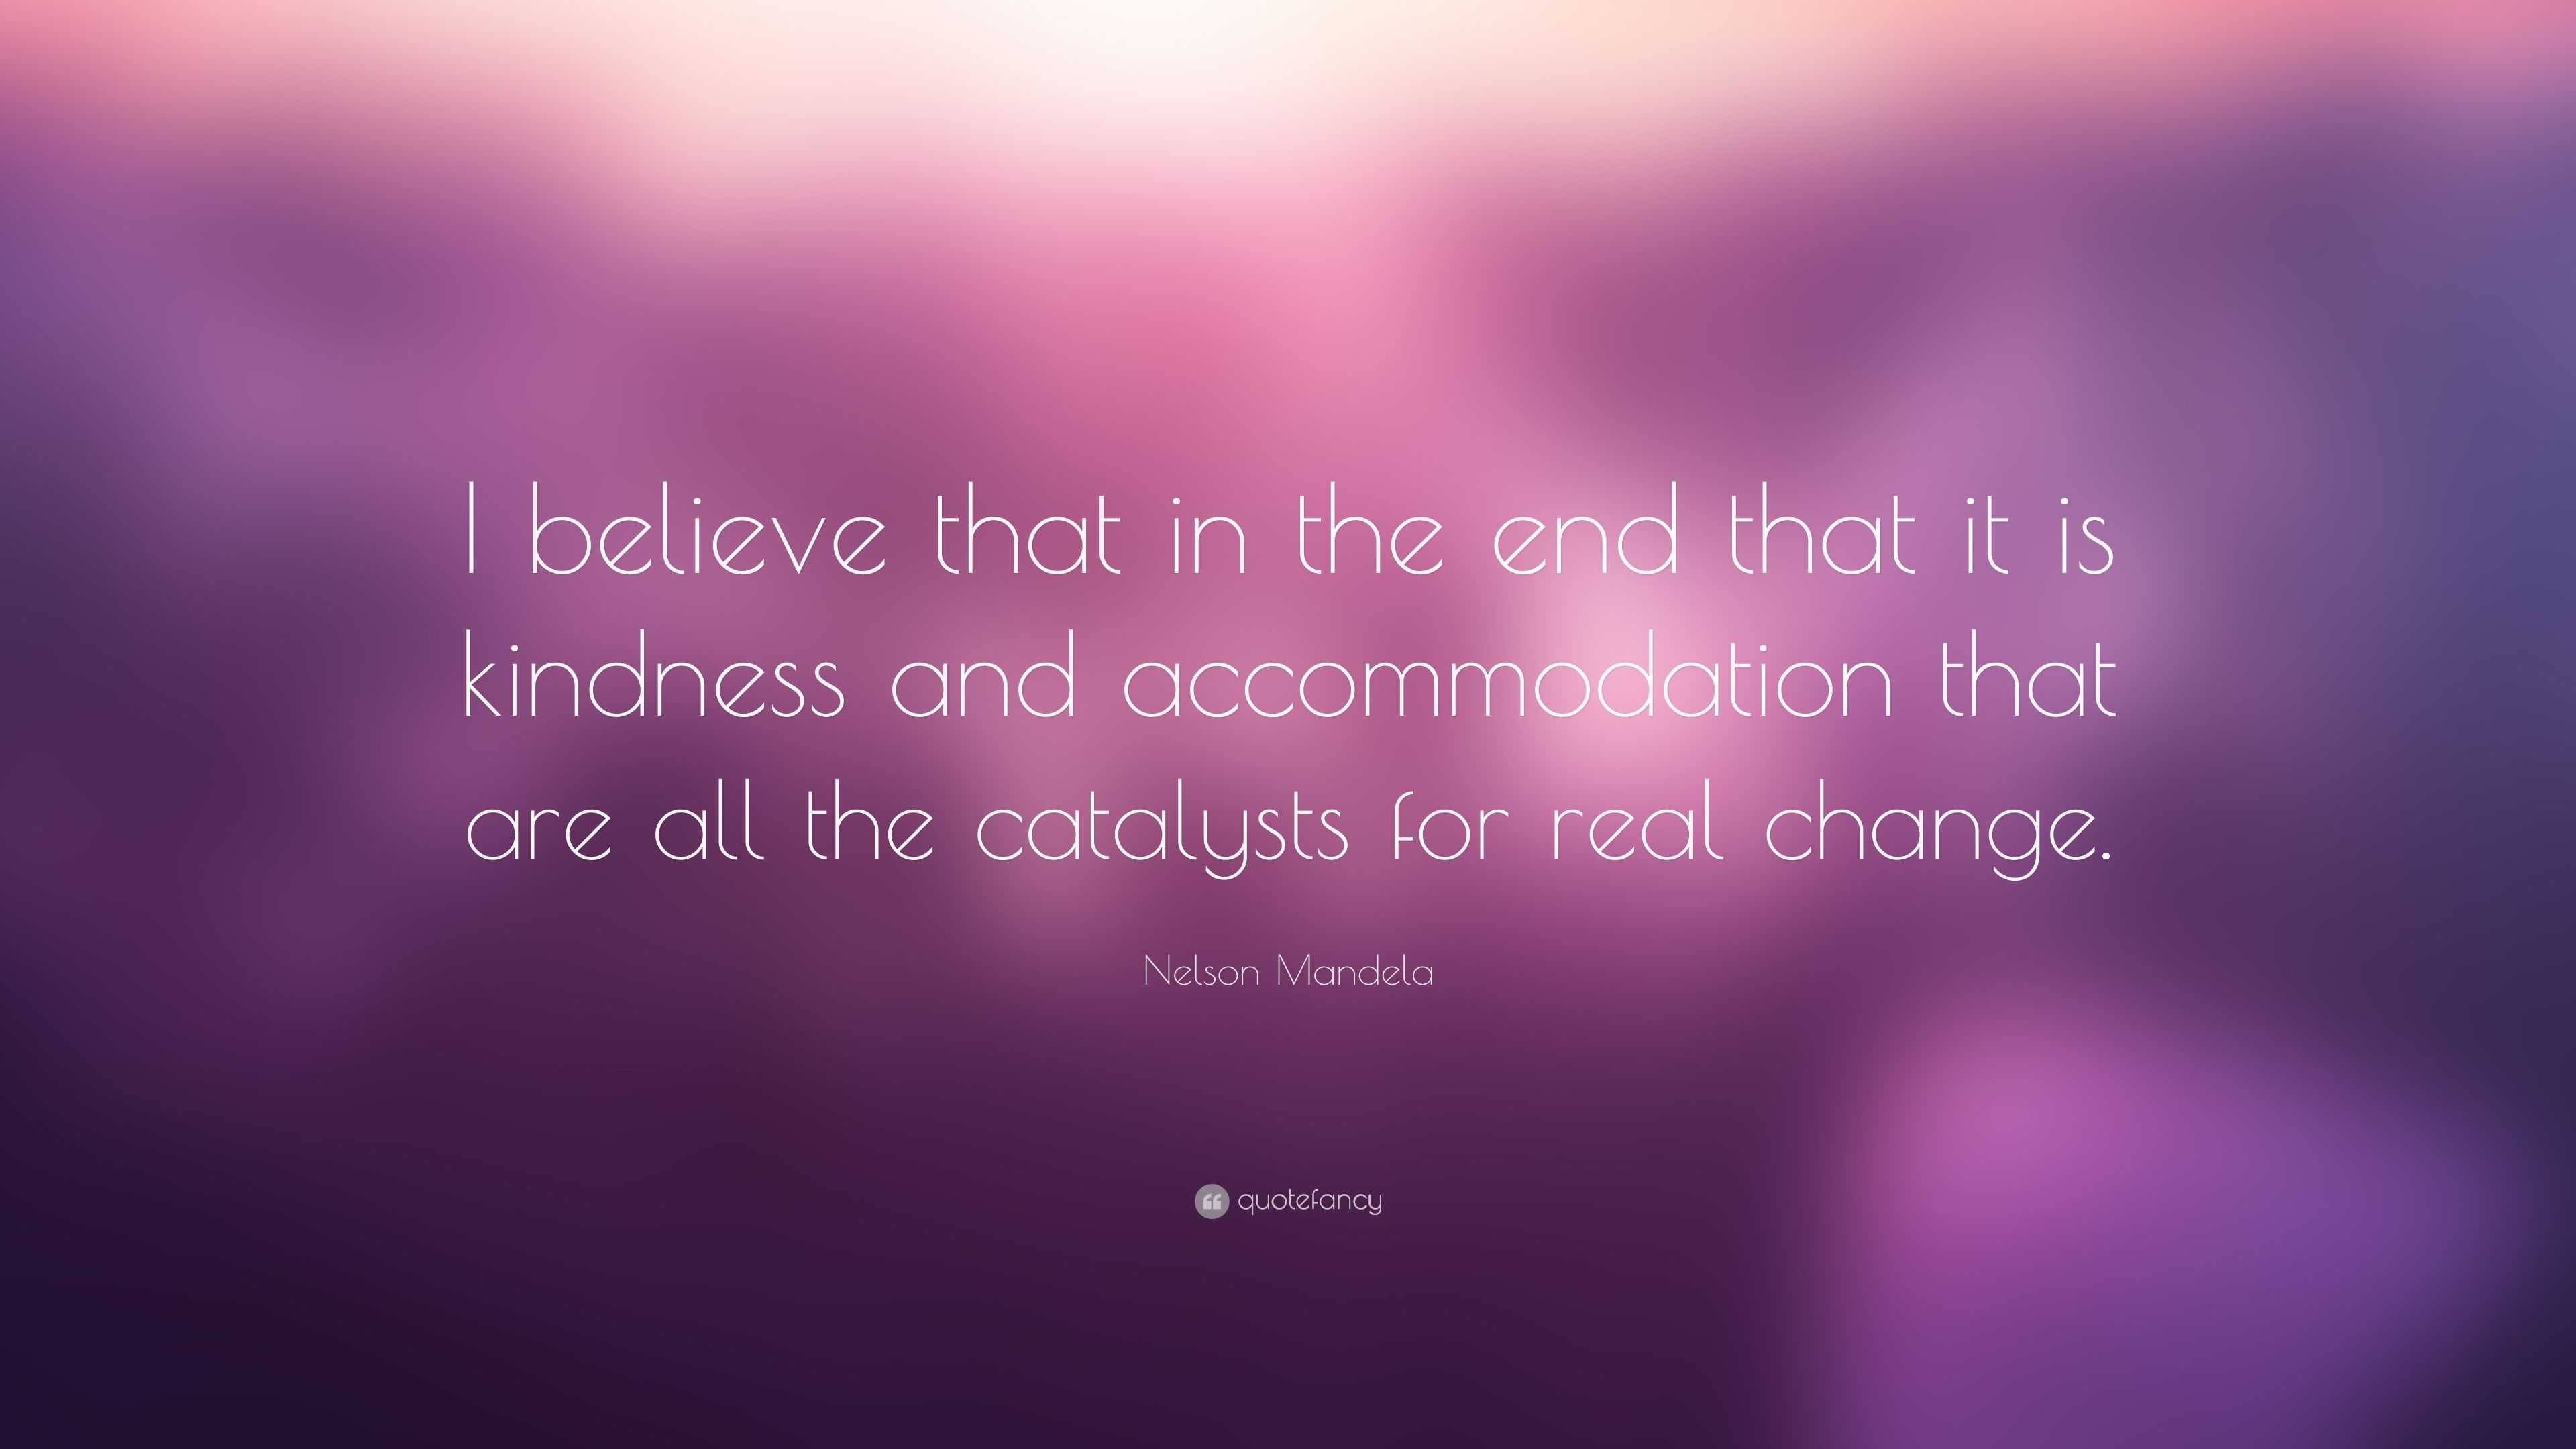 Nelson Mandela Quote “i Believe That In The End That It Is Kindness And Accommodation That Are